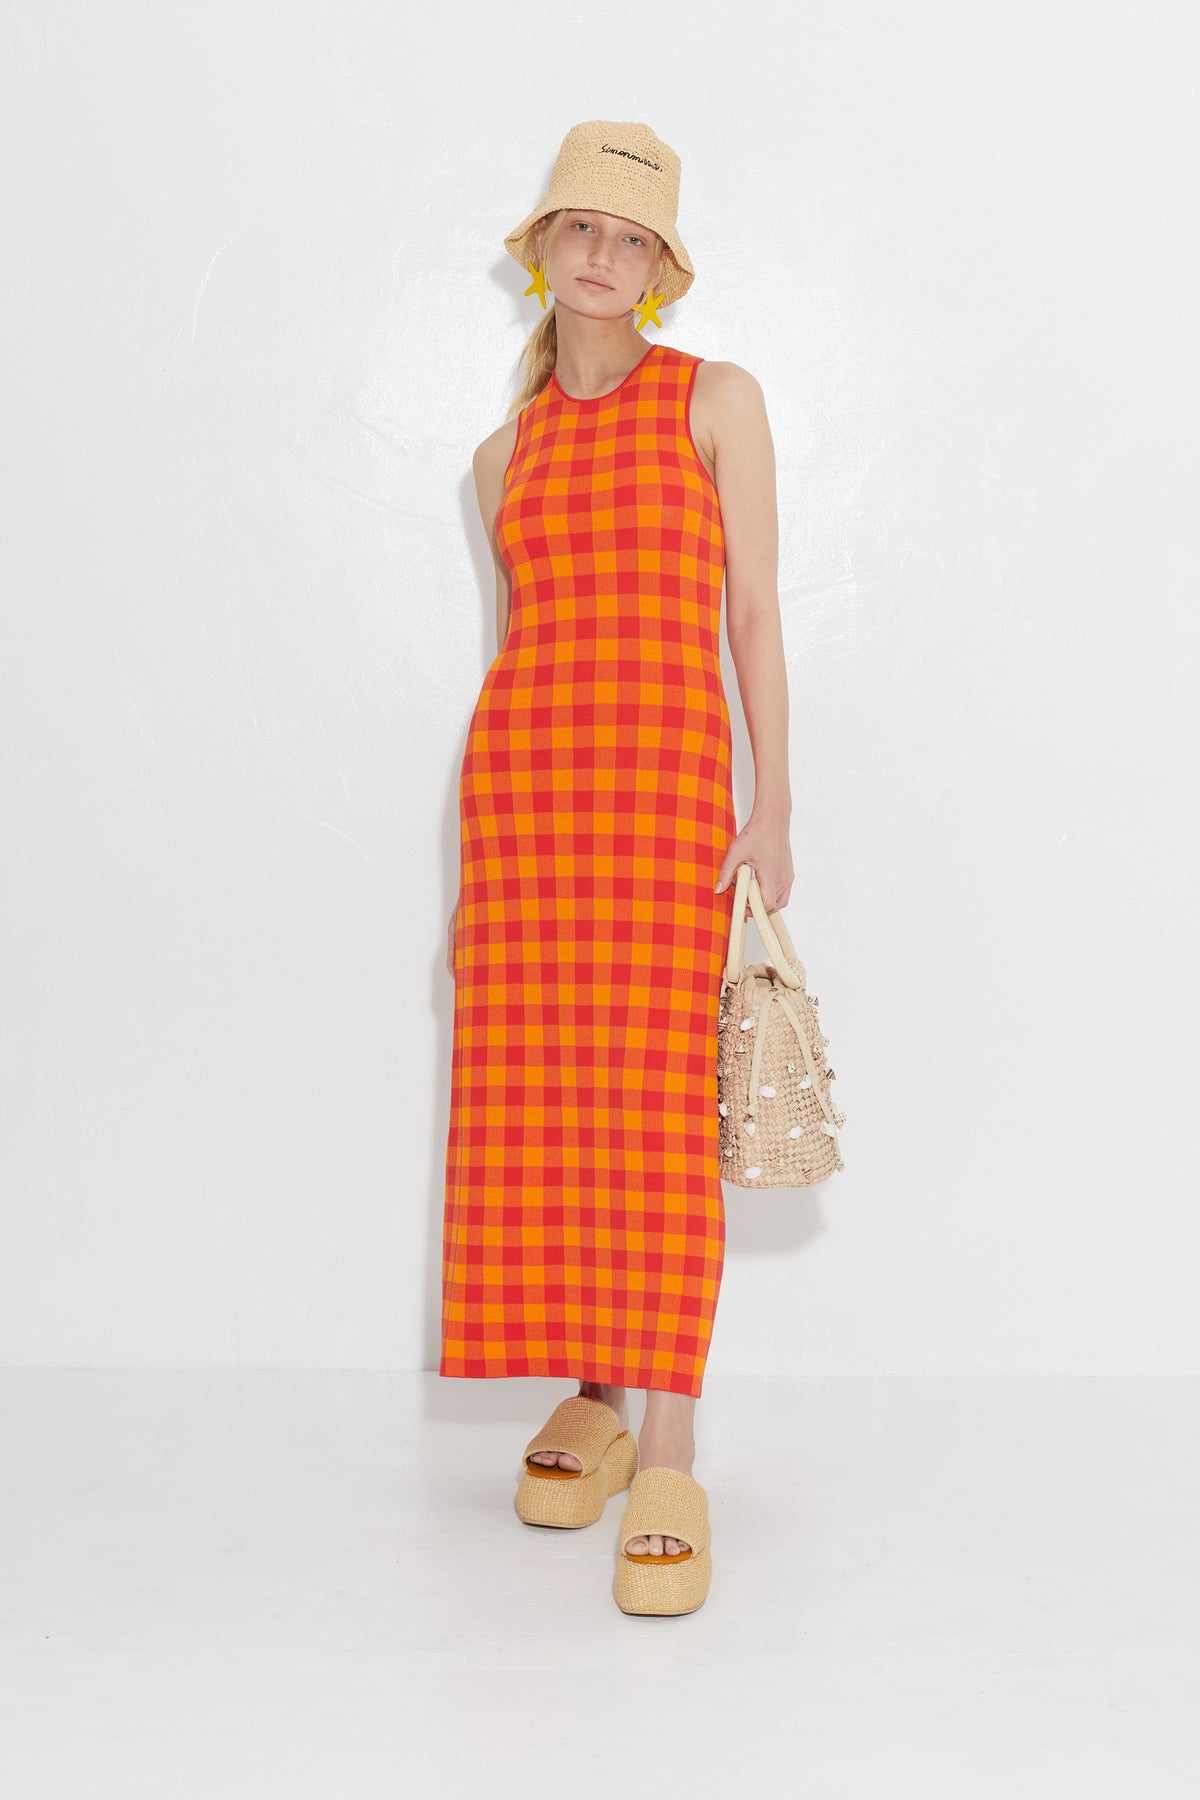 Knits By Axon Sleeveless Dress in Retro Red Gingham